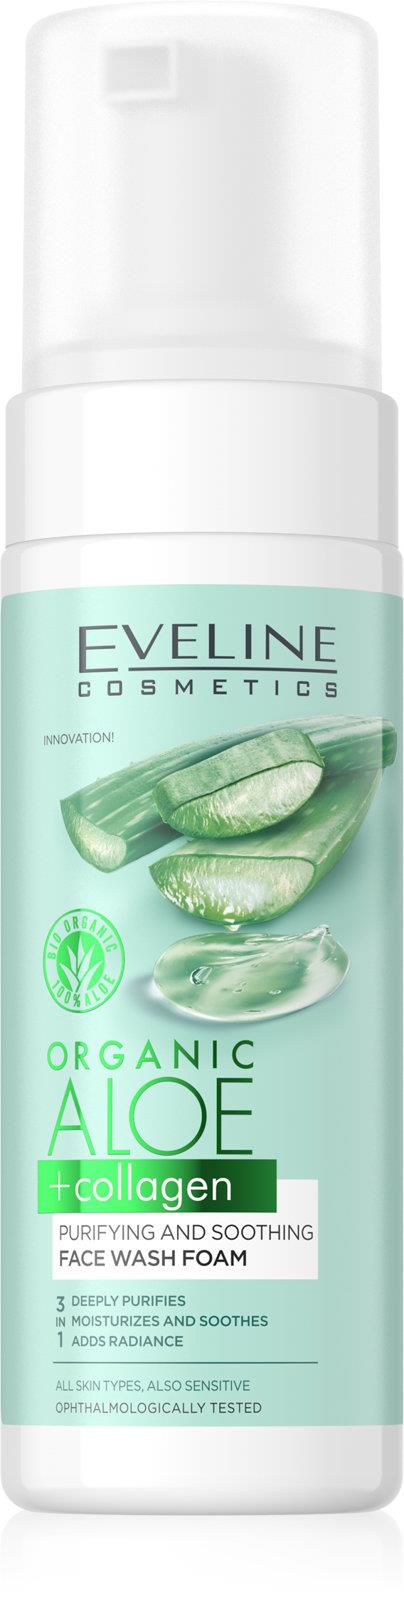 Eveline Organic Aloe + Collagen Purifying Soothing Face Wash Foam 150ml